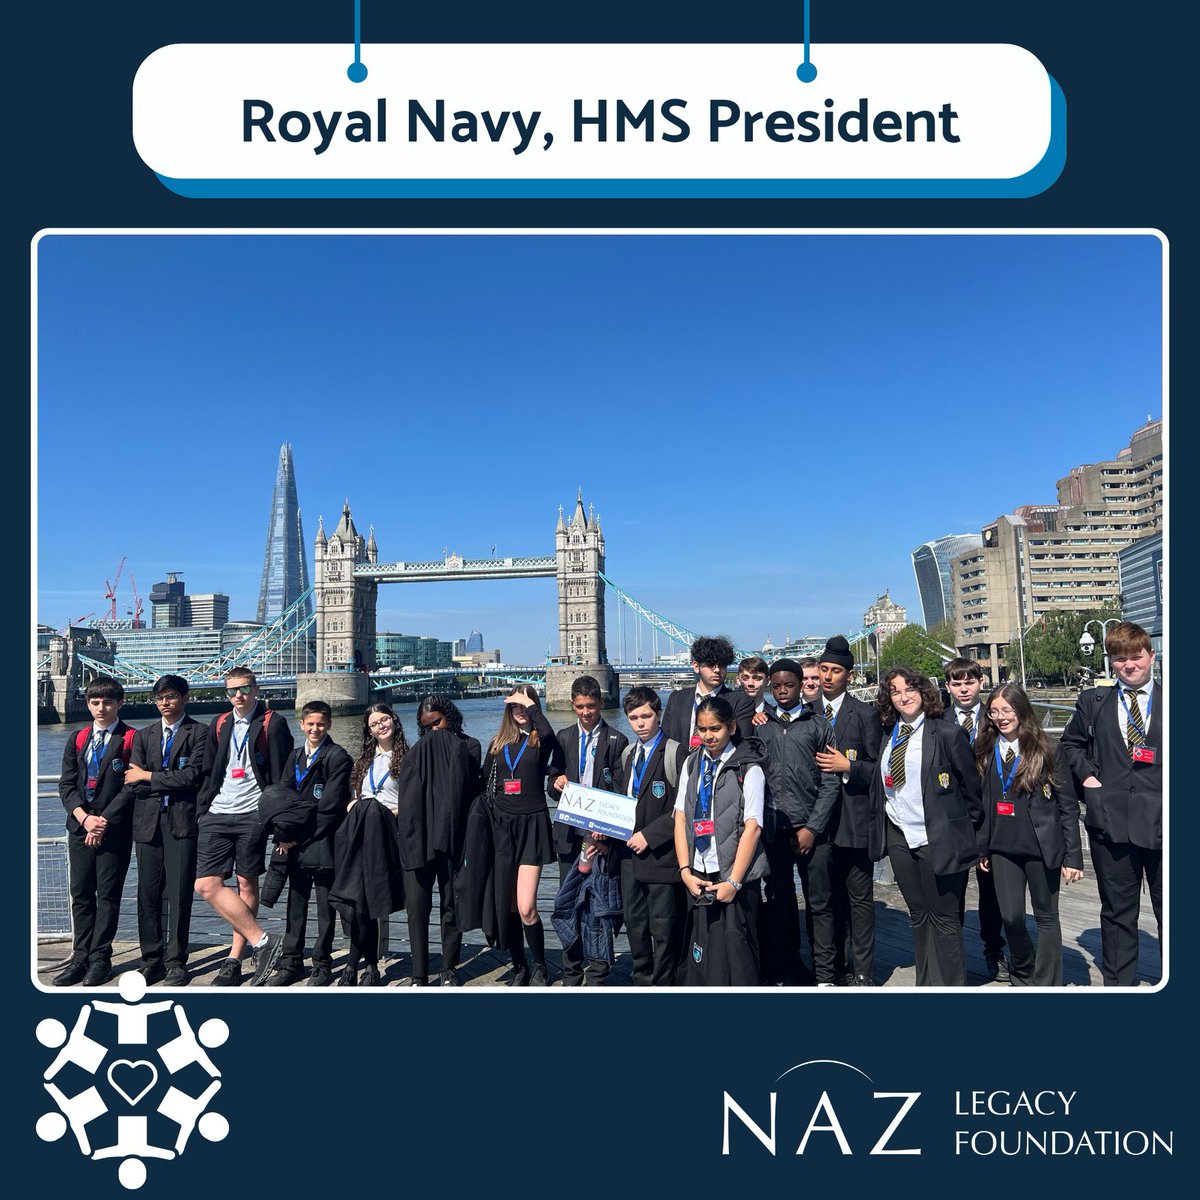 If you want to meet amazing people and support local communities then join the Maritime Reserves. 🎉 @HMSPresidentRNR for hosting @NazLegacy Foundation.